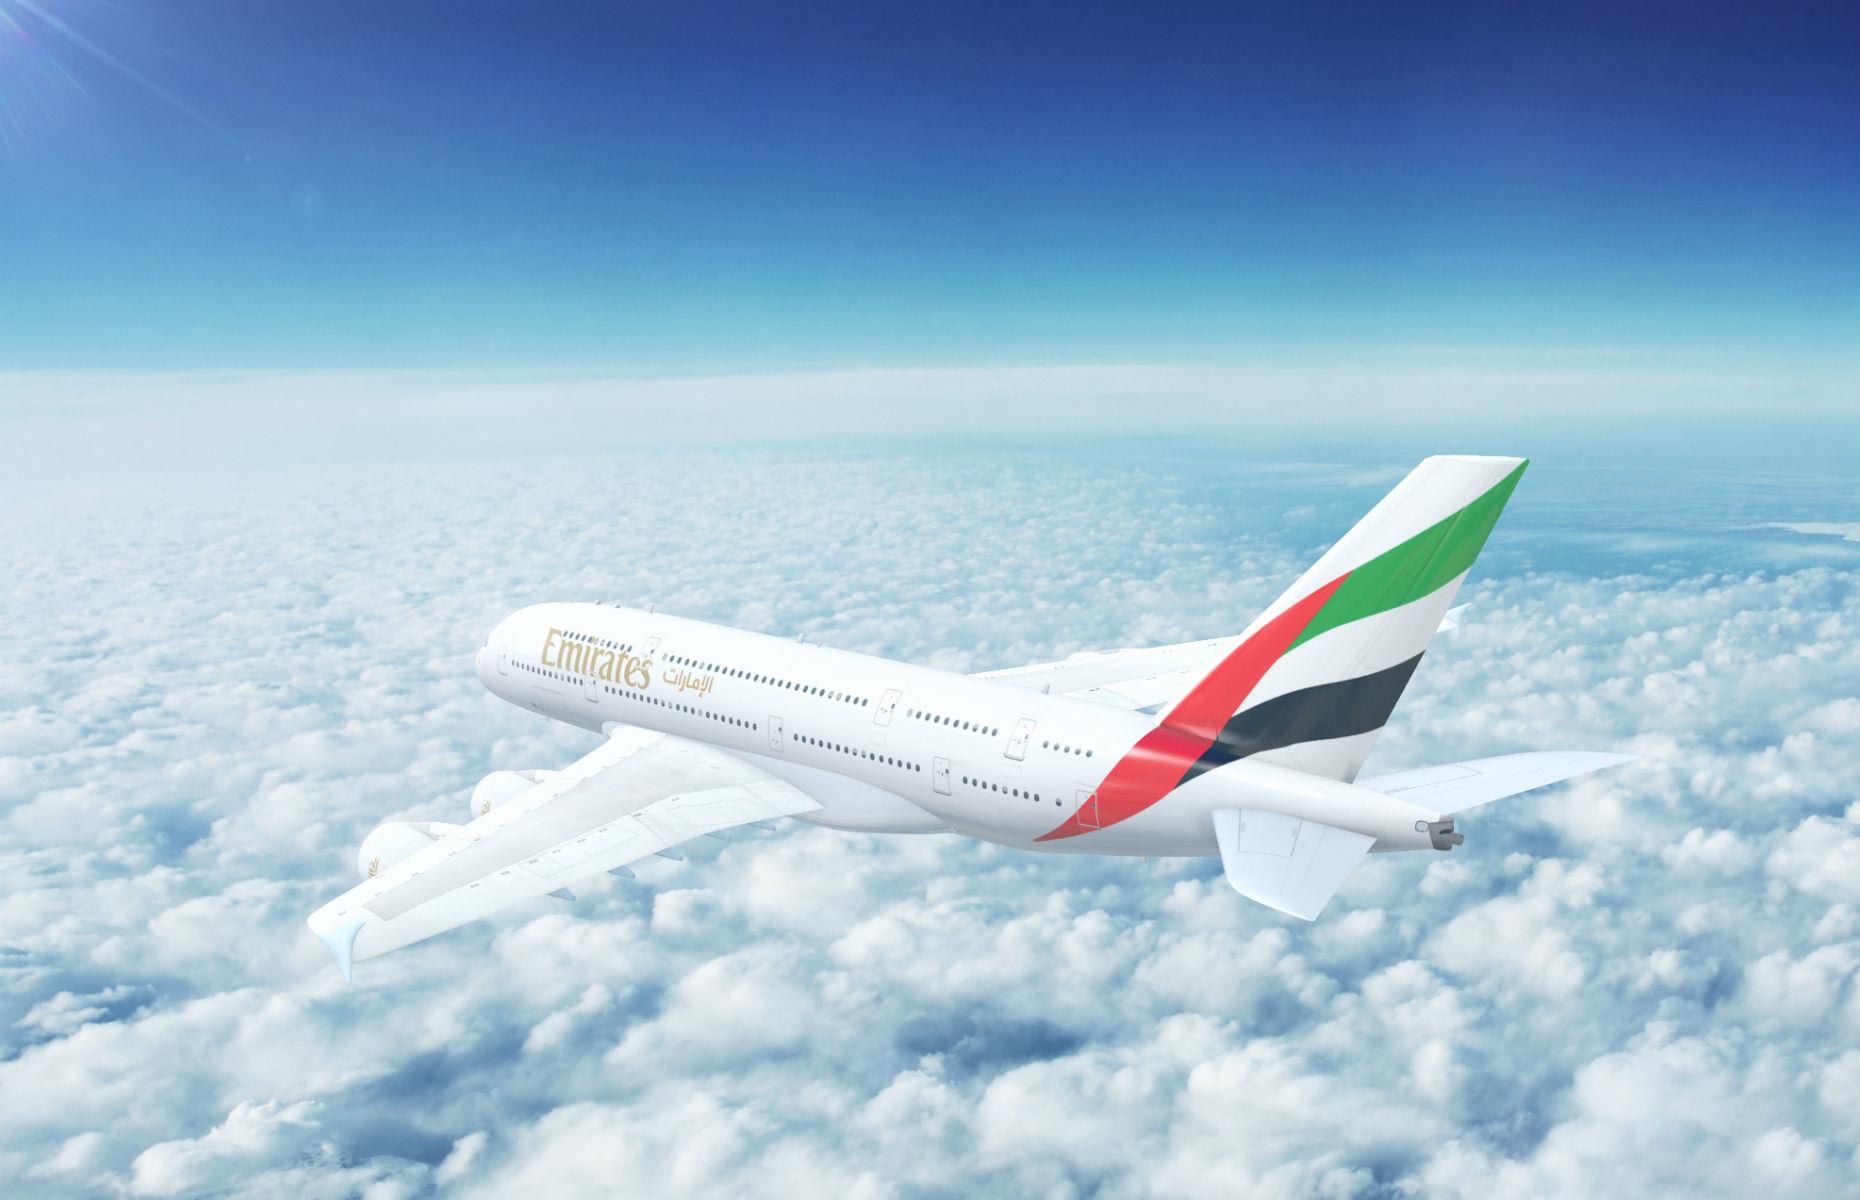 <p>Despite its impressive reputation for in-flight comfort and specifications, the A380 was not a financial success. Airbus delivered its last A380 in 2021 – its 123rd to Emirates and its 251st overall – ending a 14-year production run. The plane was undoubtedly a marvel of engineering, but Airbus fell well short of the 1,000 delivered models once predicted, and the over-budget program never turned a profit. Critics say it was simply <em>too</em> big, and is now being outpaced and replaced by smaller, less costly aircraft.</p>